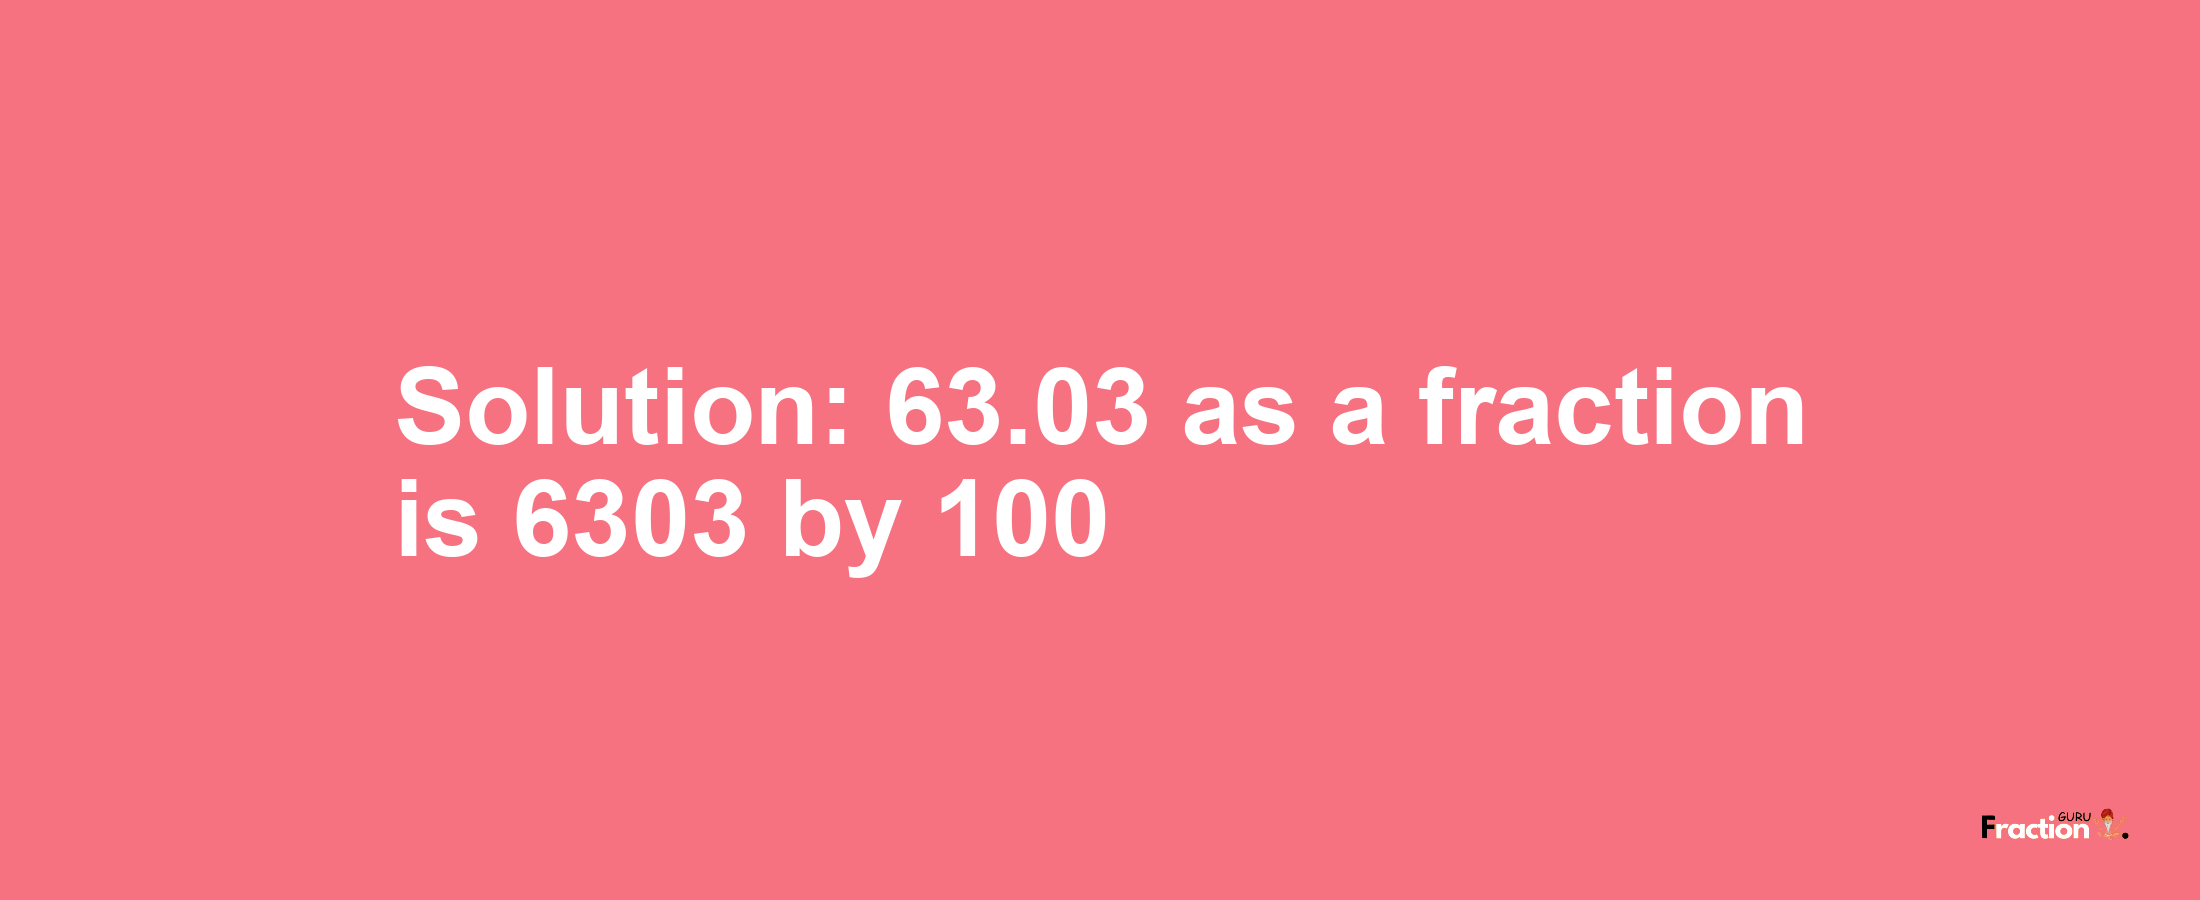 Solution:63.03 as a fraction is 6303/100